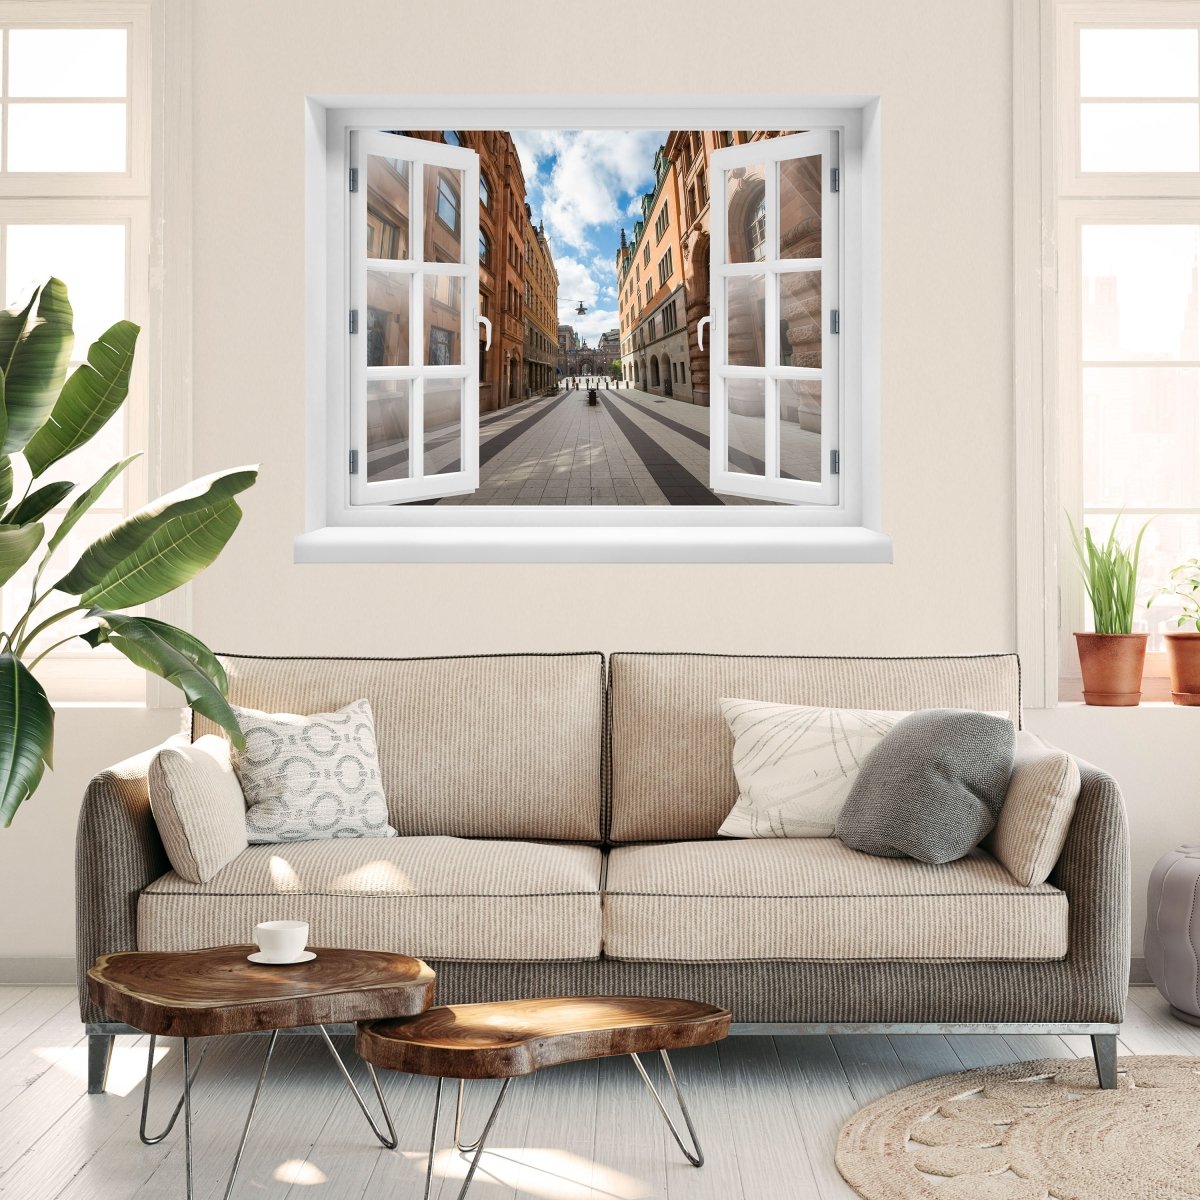 3D wall sticker Old Town, Stockholm - Wall Decal M0820